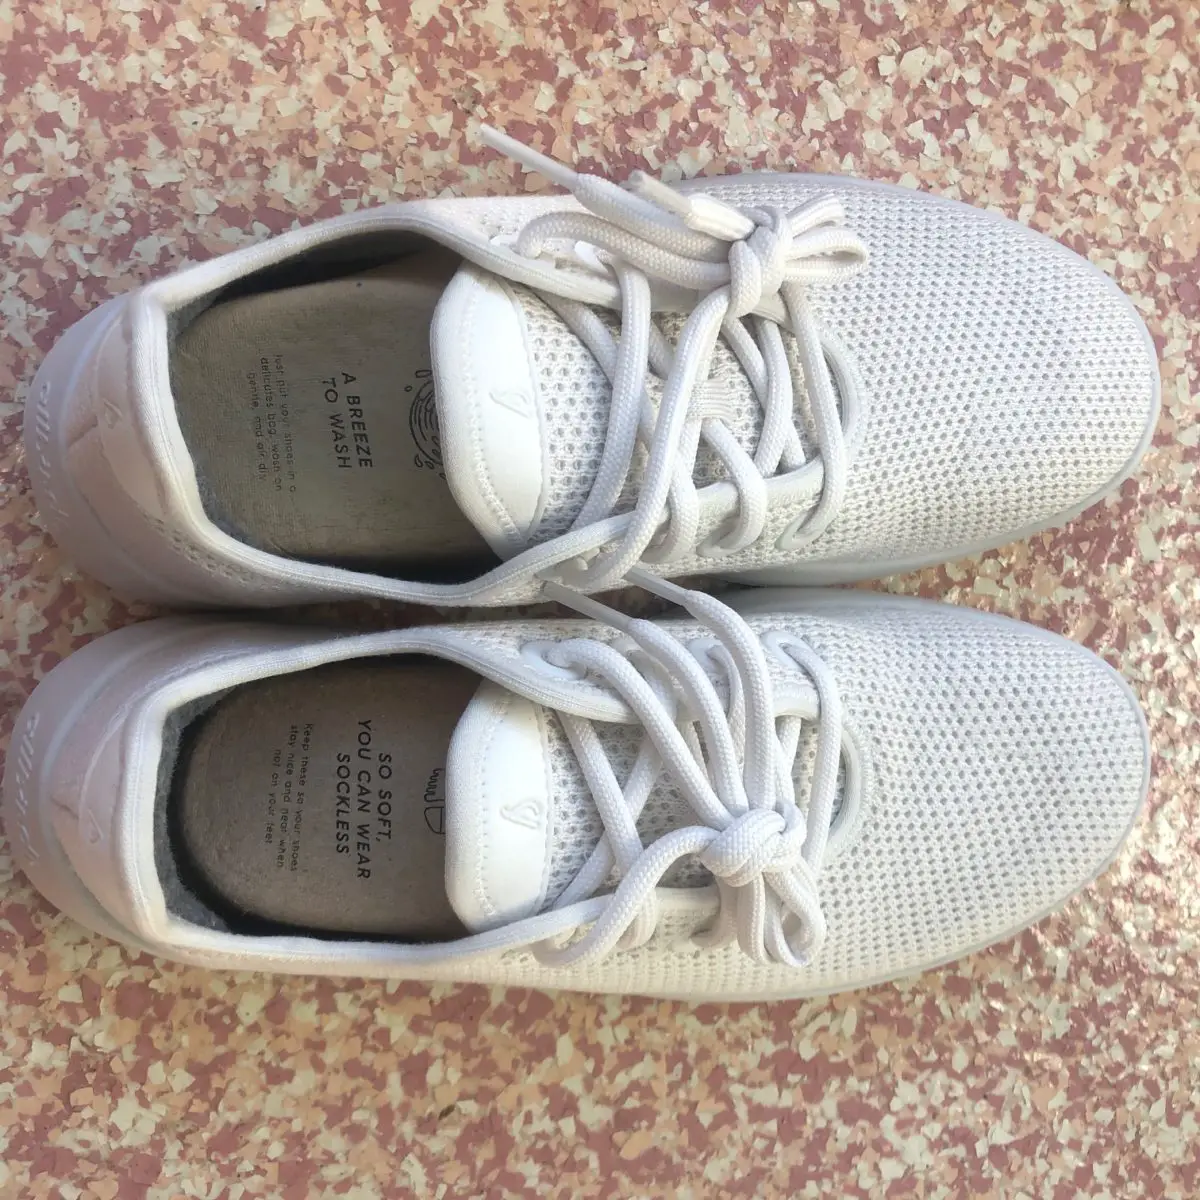 Honest Review of the Allbirds Tree Runners – The Modern Mindful Mom